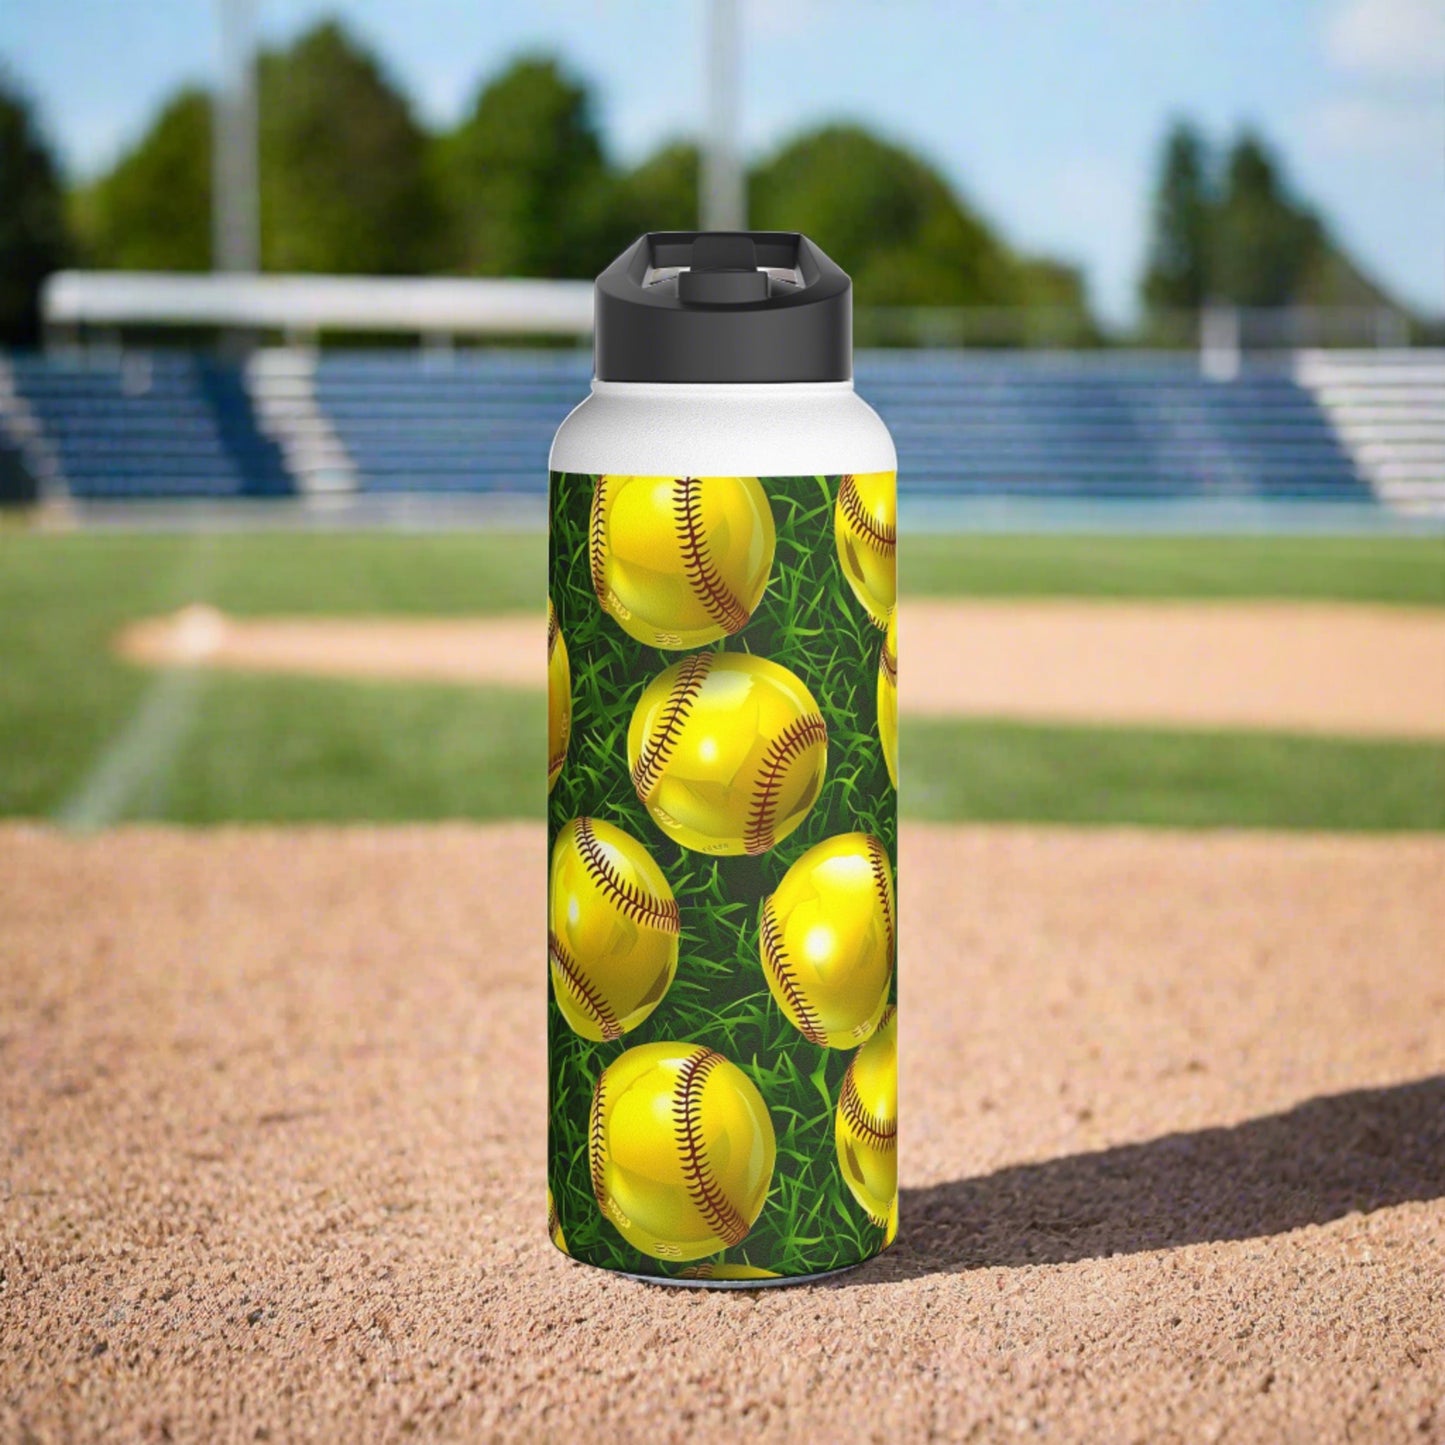 Stainless Steel Water Bottle Thermos, 32oz, 3D Softball - Double Wall Insulation Keeps Drinks Hot or Cold